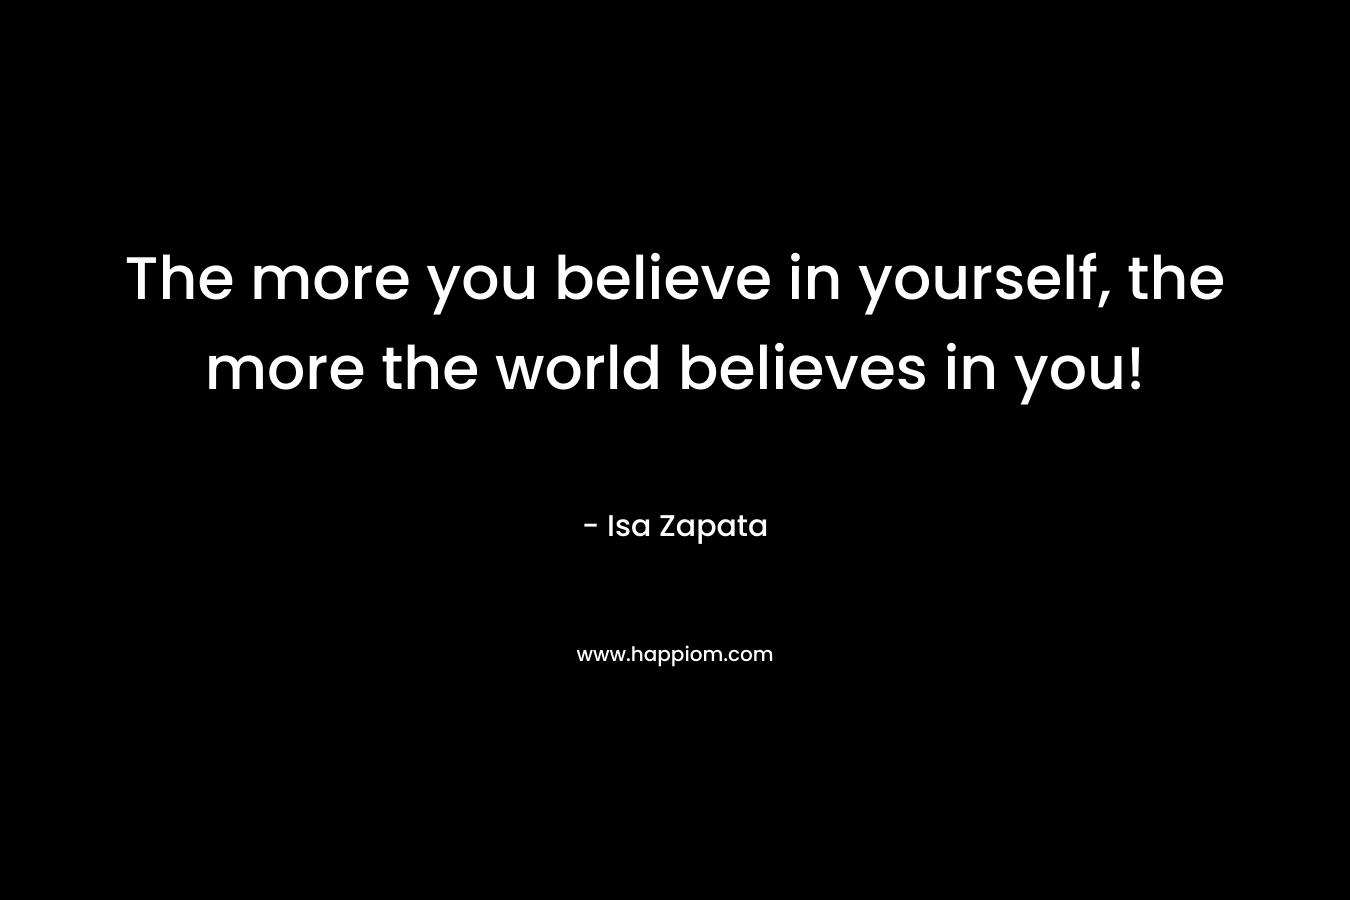 The more you believe in yourself, the more the world believes in you!